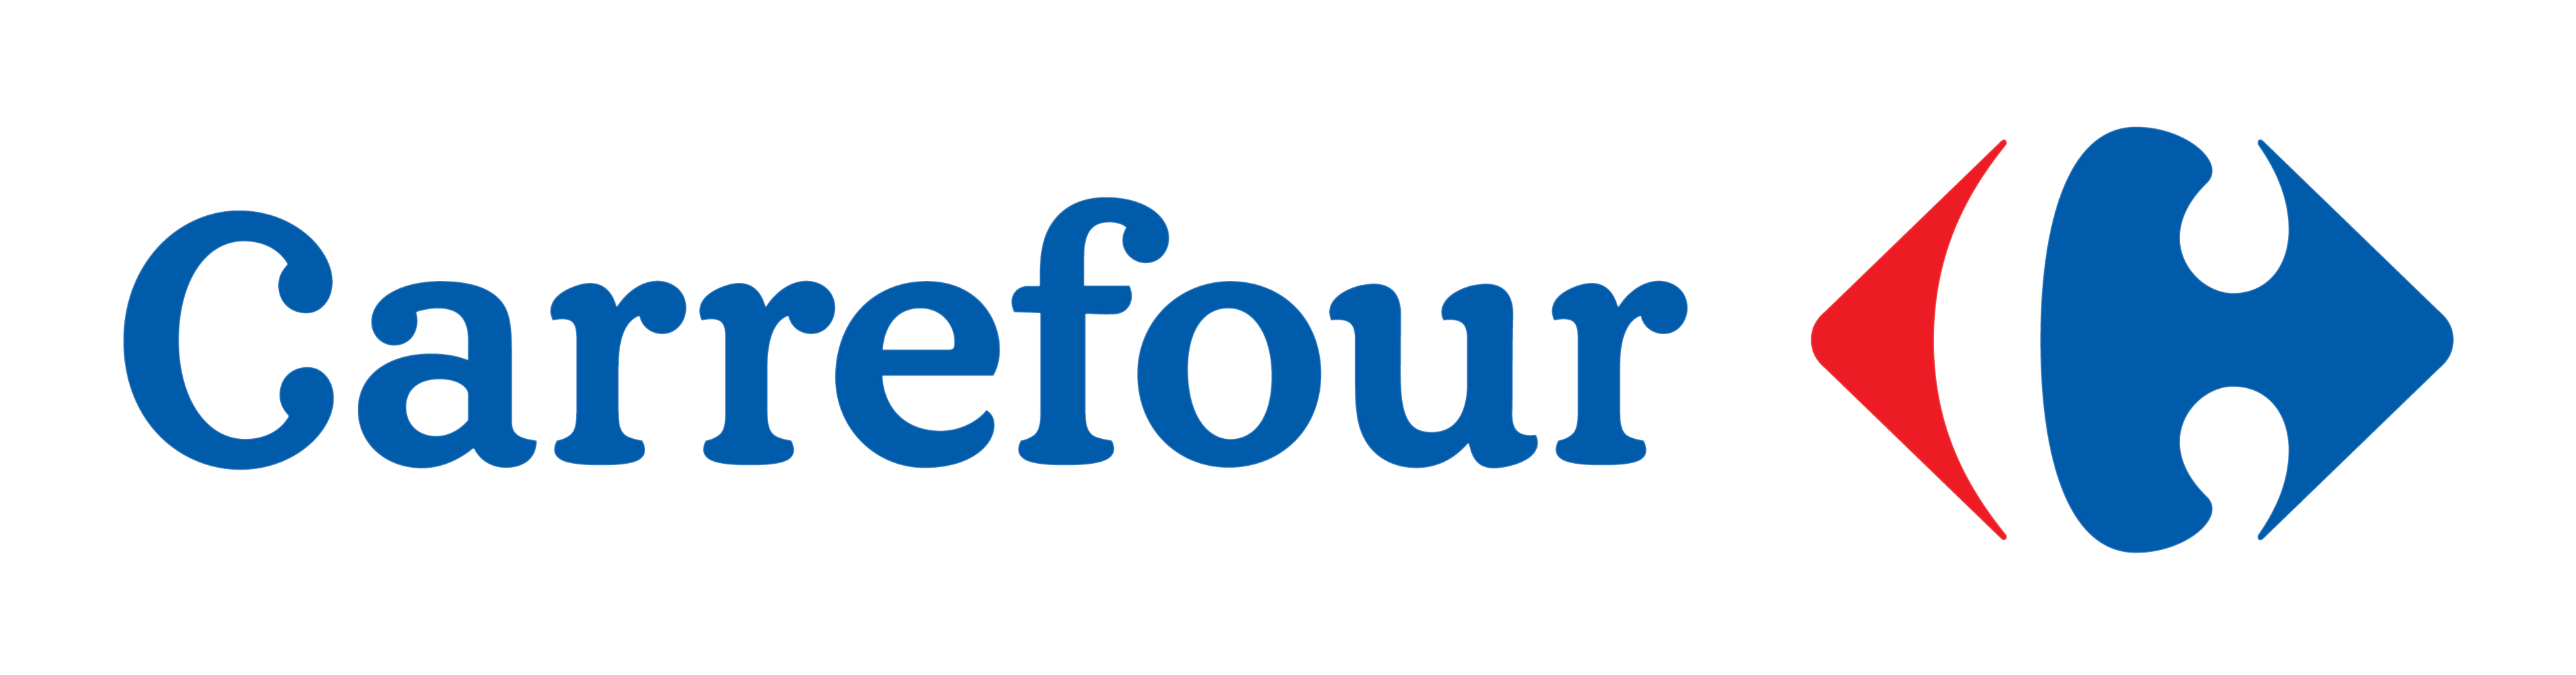 Carrefour-Logo.png